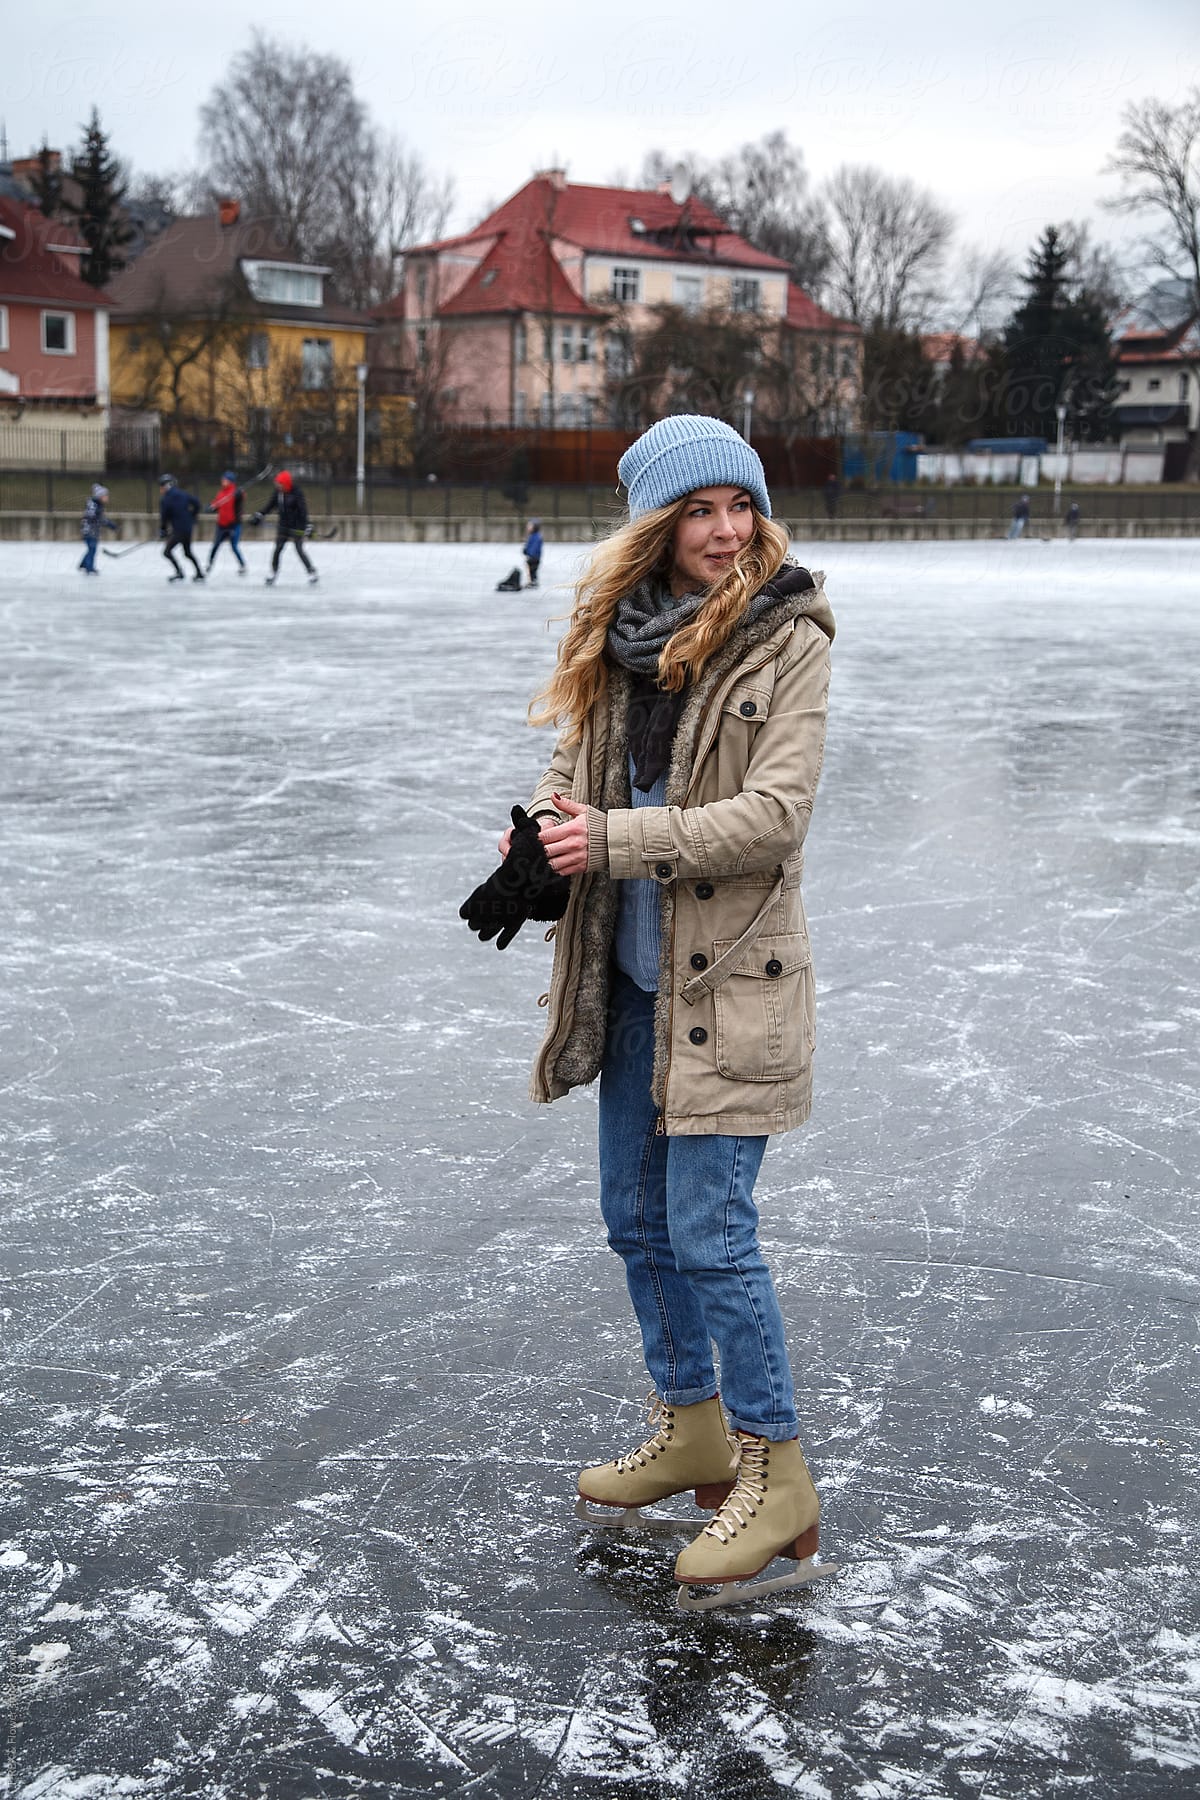 Woman putting on gloves on rink